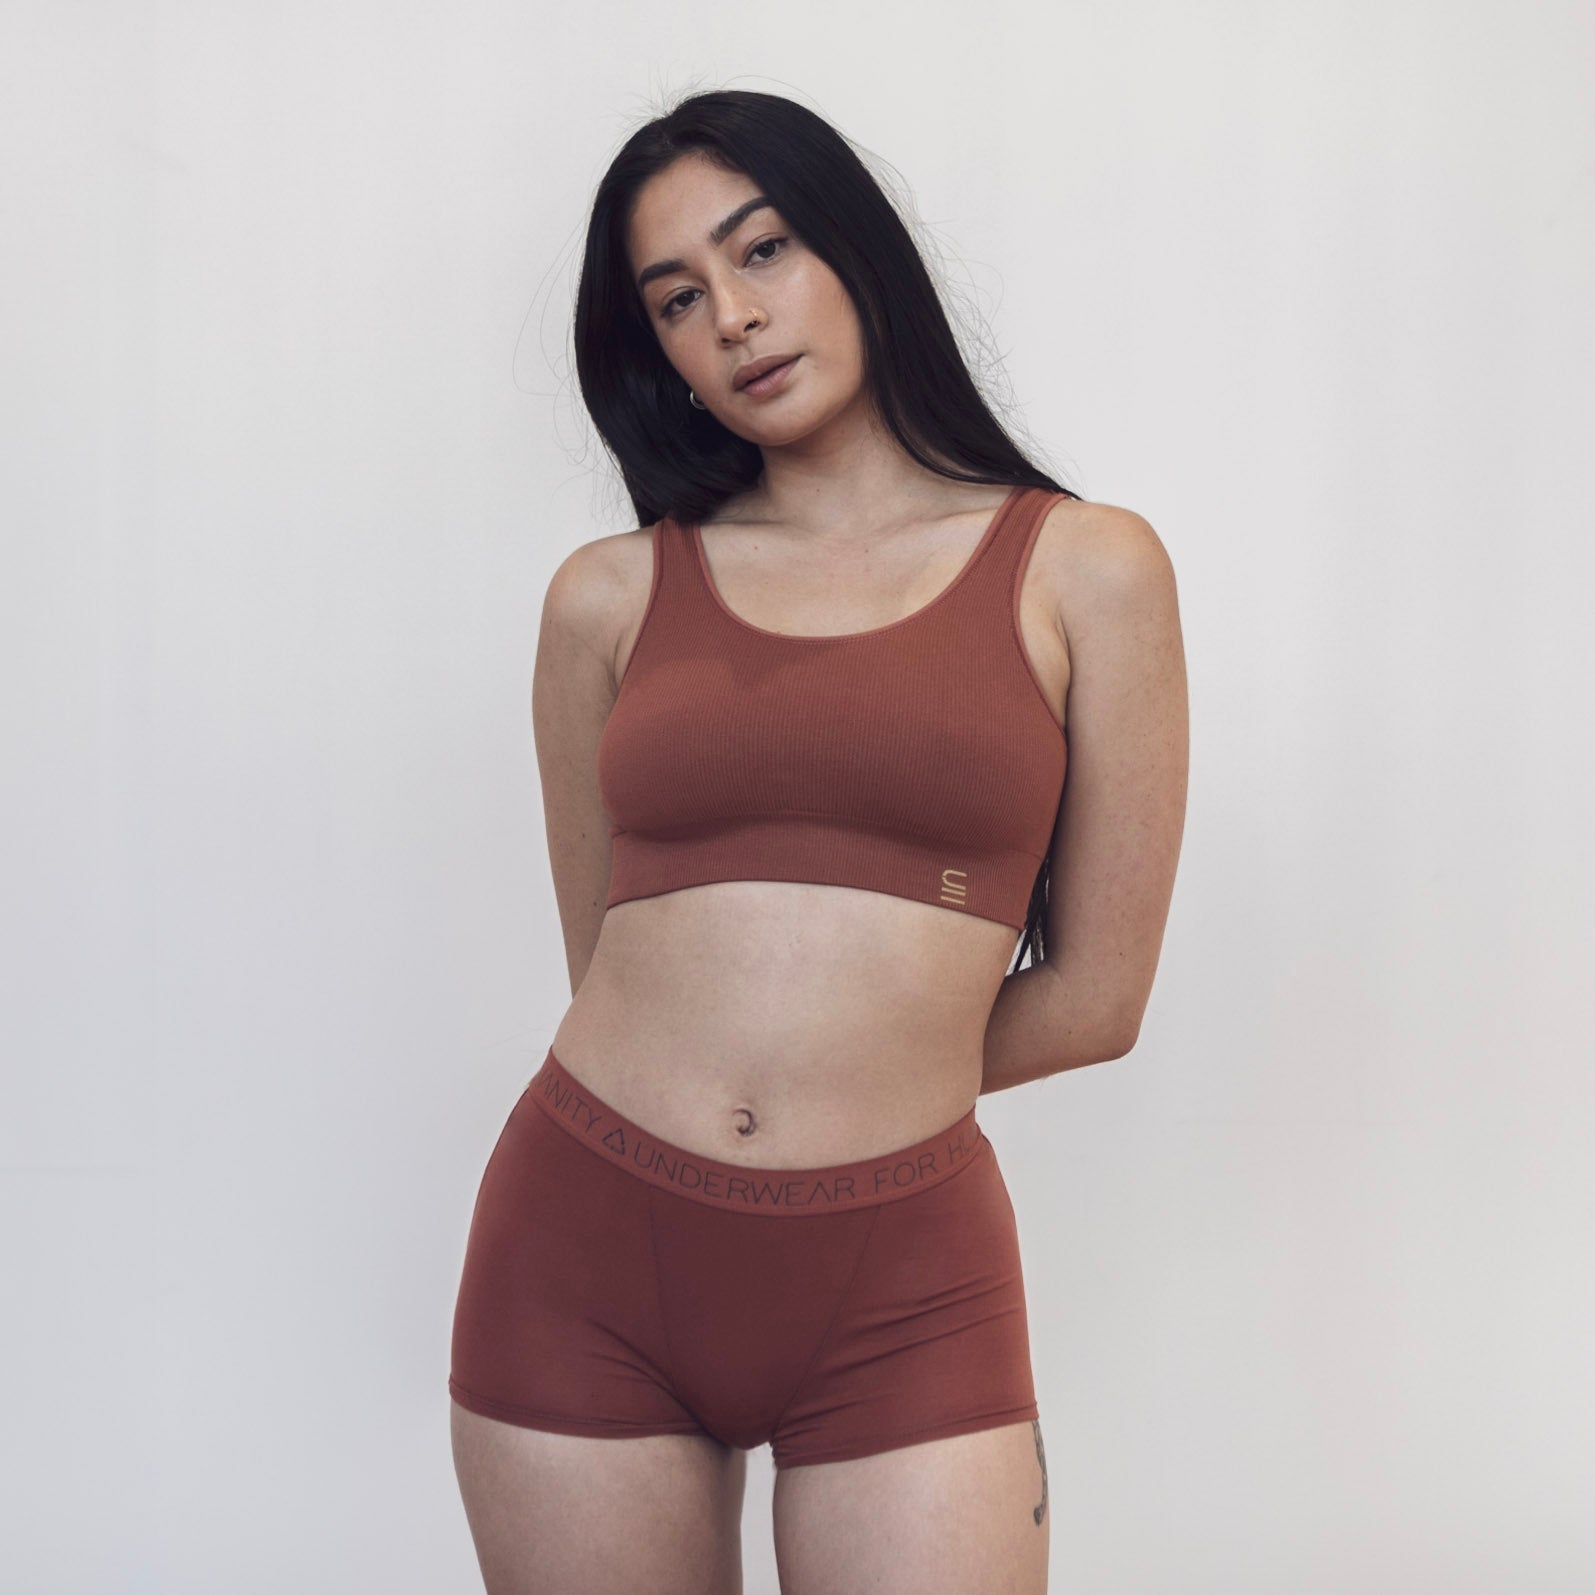 Sustainable, ethically produced clay shorts by Underwear for Humanity. Mid-rise, full coverage seat, thin, no-dig, elastic waist, short length sits higher on the leg. Made from sustainable tencel and recycled elastic. Models wear the shorts. 